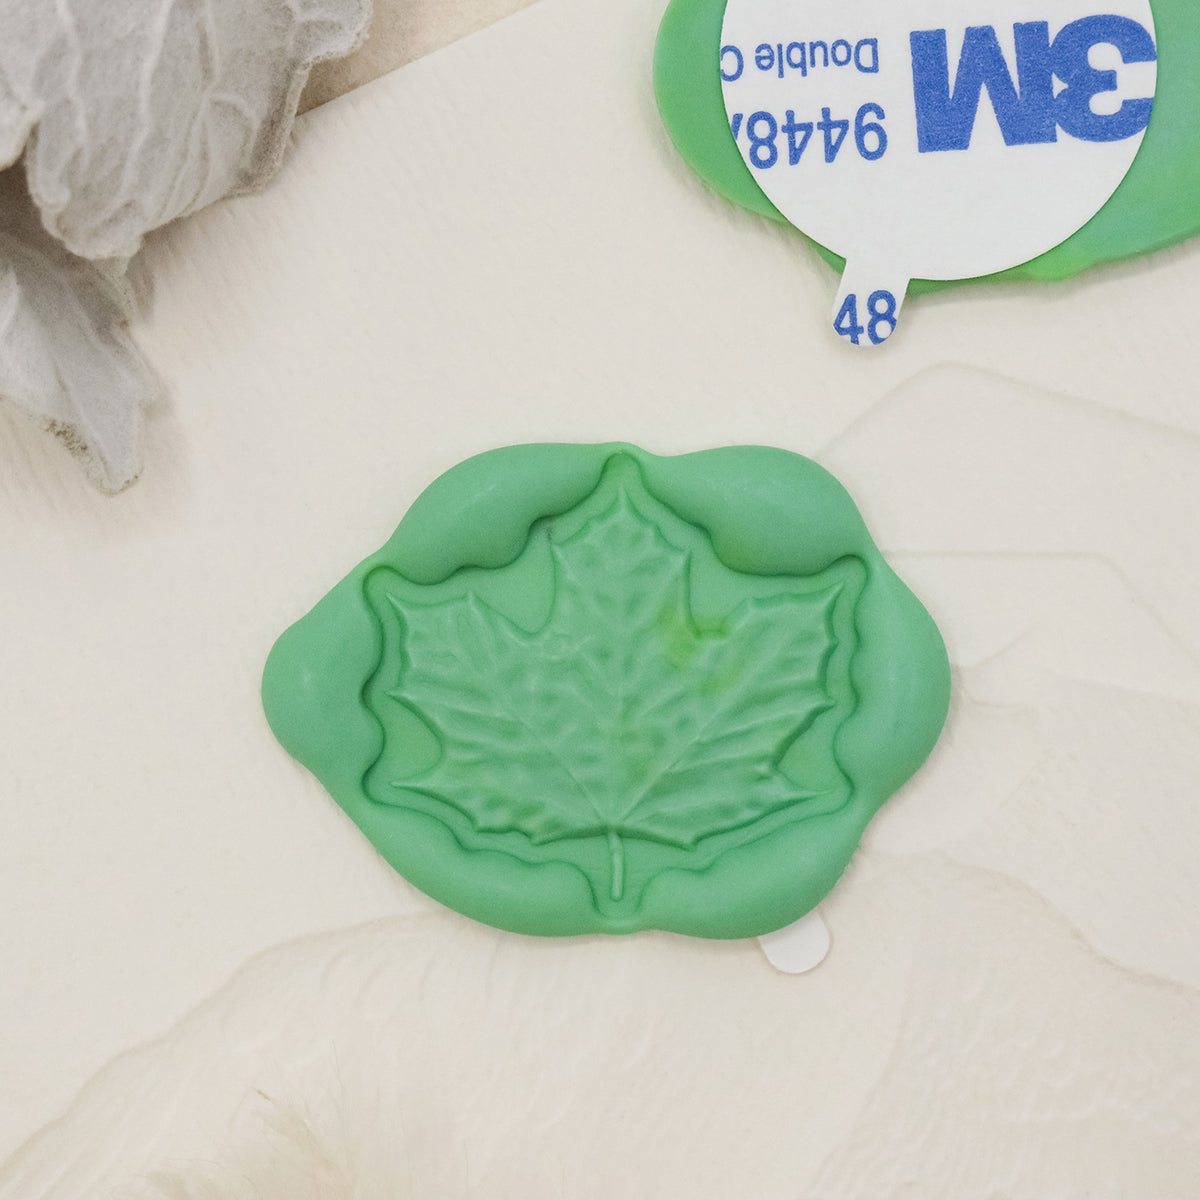 Stamprints 3D Relief Maple Leaf Self-adhesive Wax Seal Stickers 1